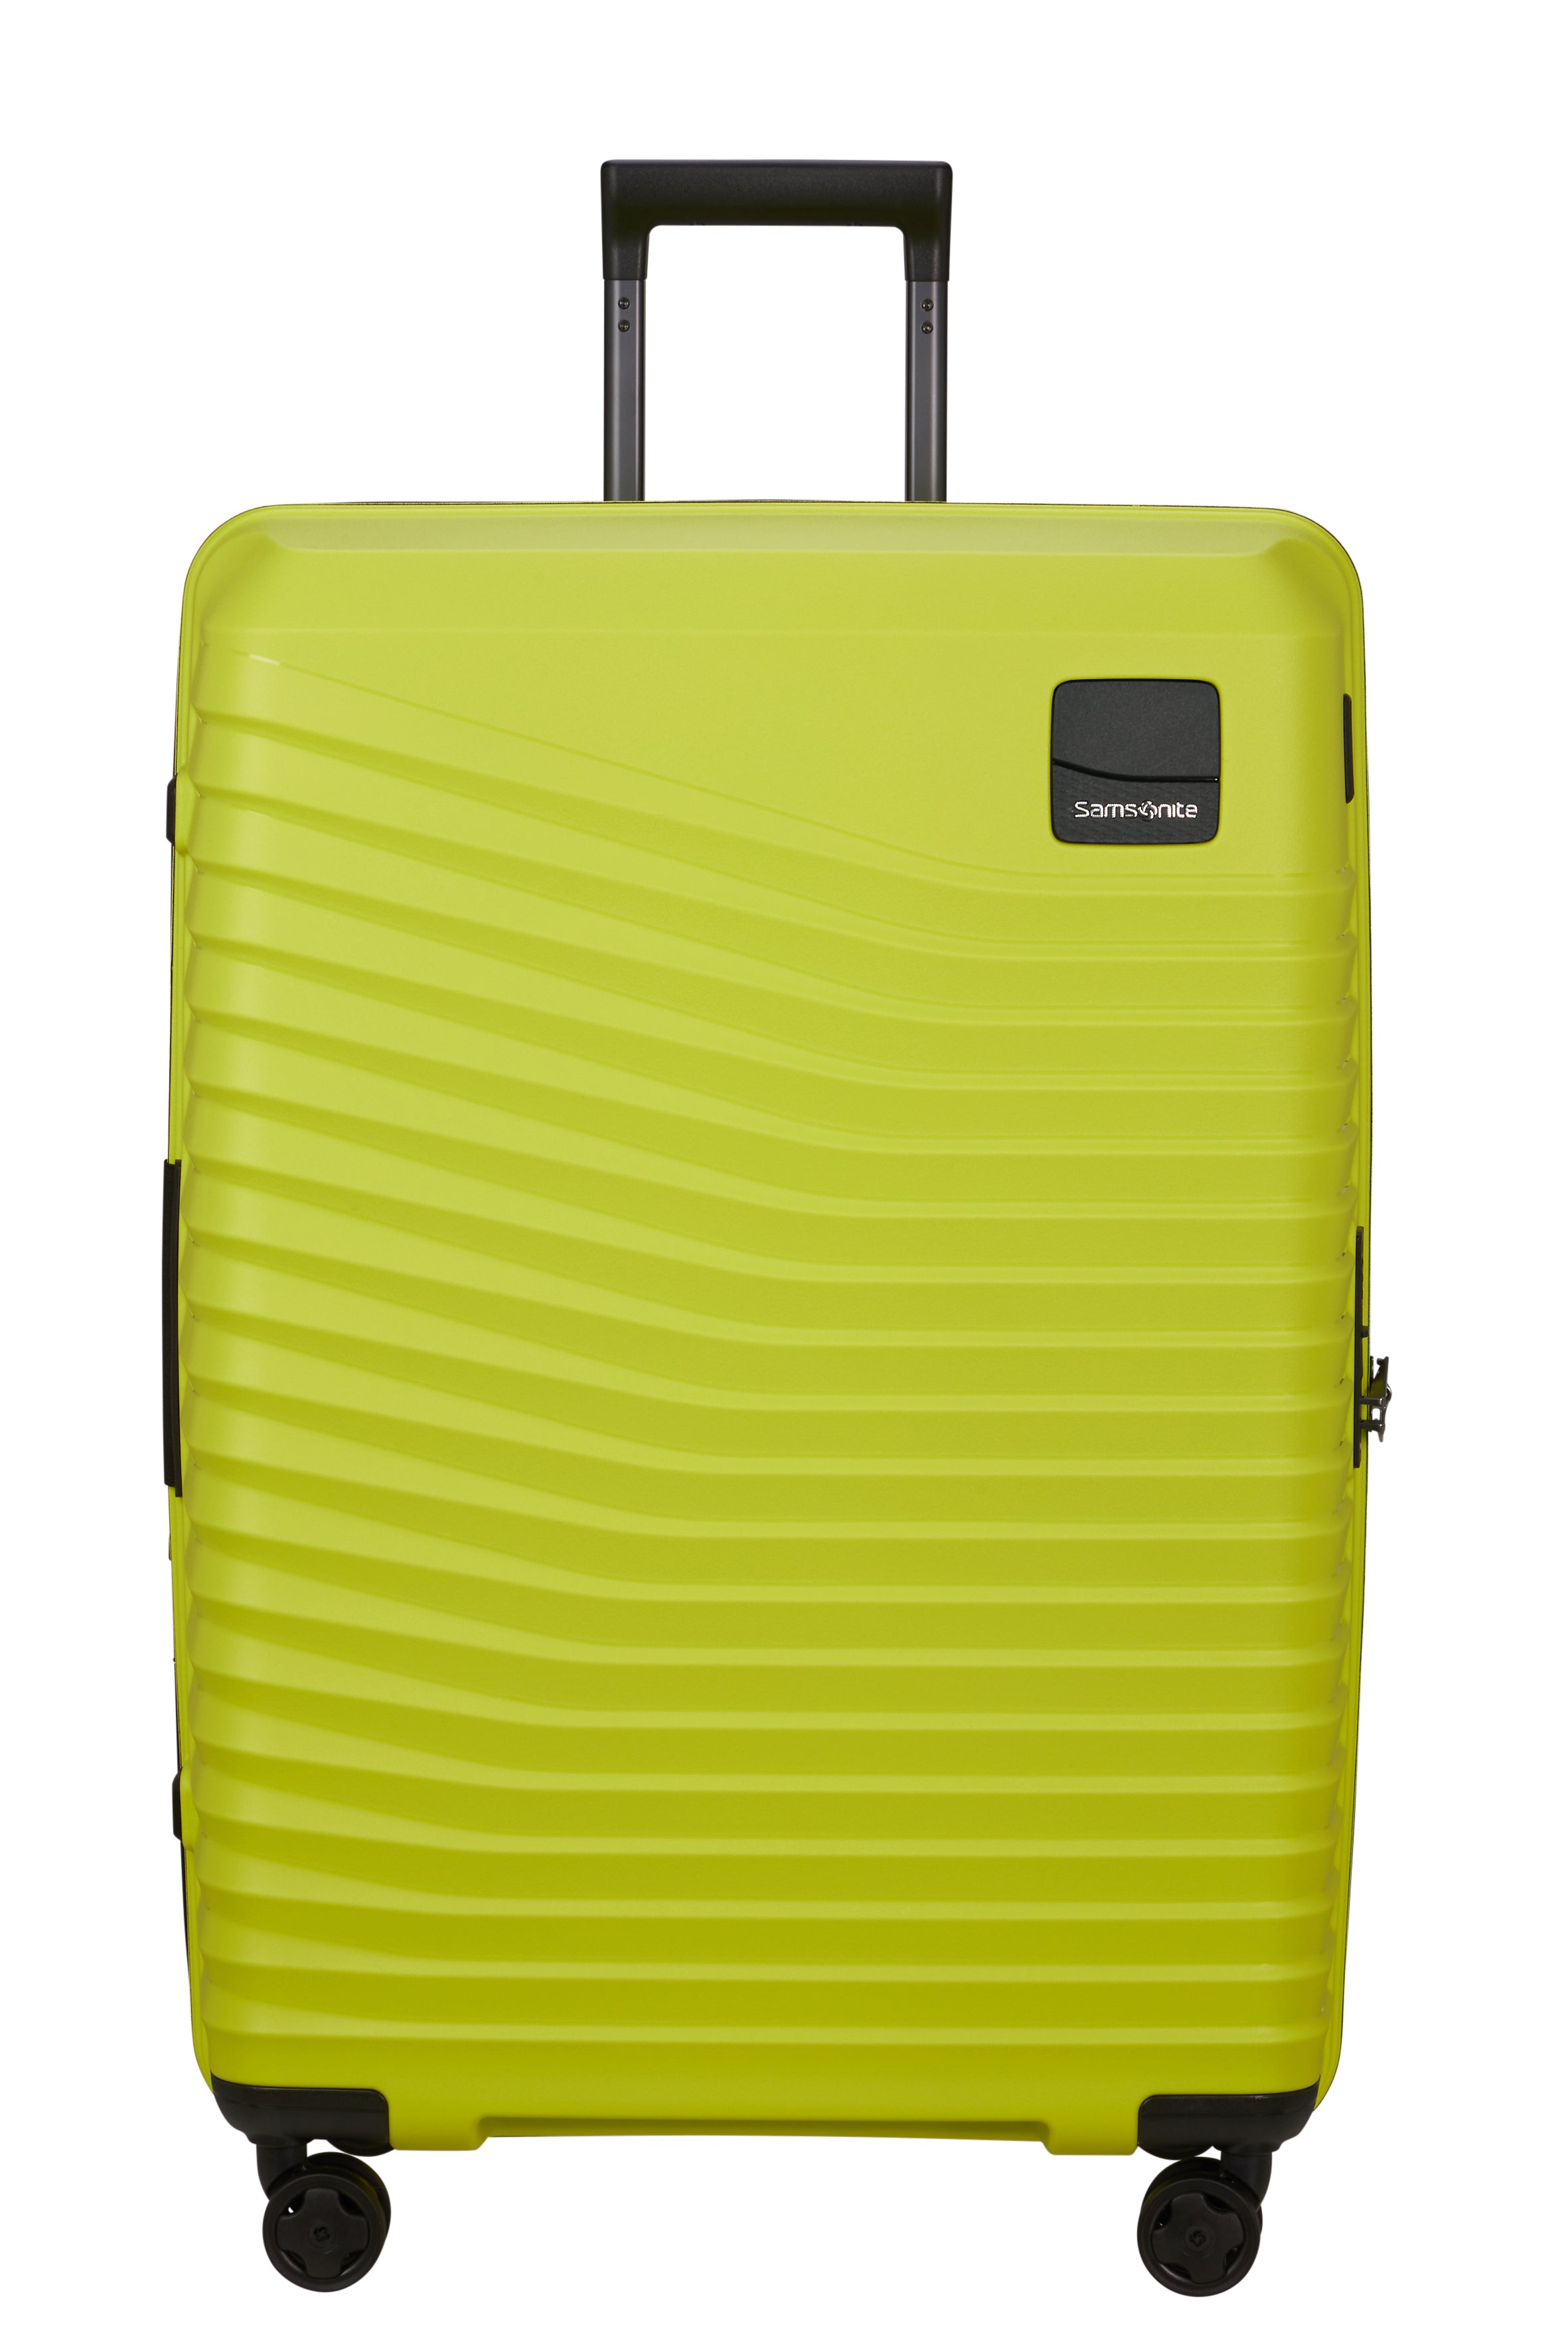 Samsonite Intuo 75cm Expandable Spinner